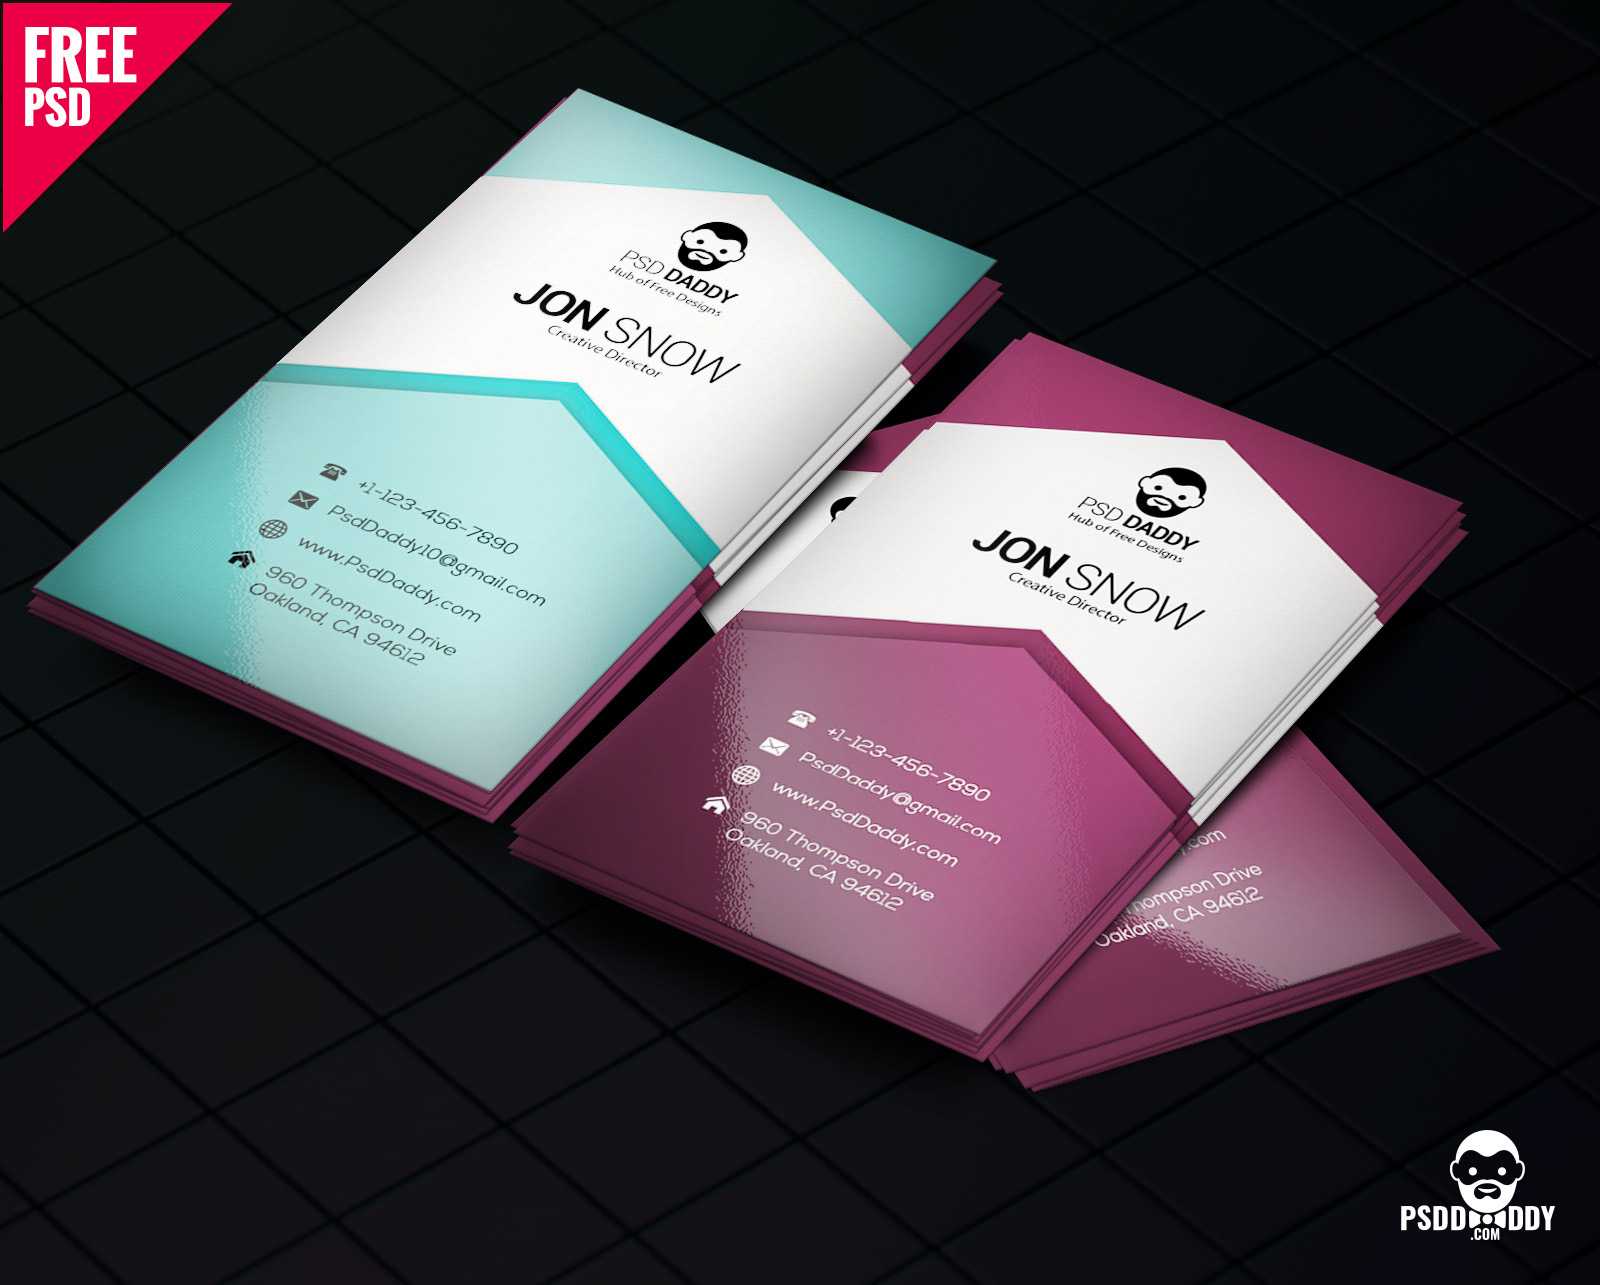 Download]Creative Business Card Psd Free | Psddaddy With Iphone Business Card Template